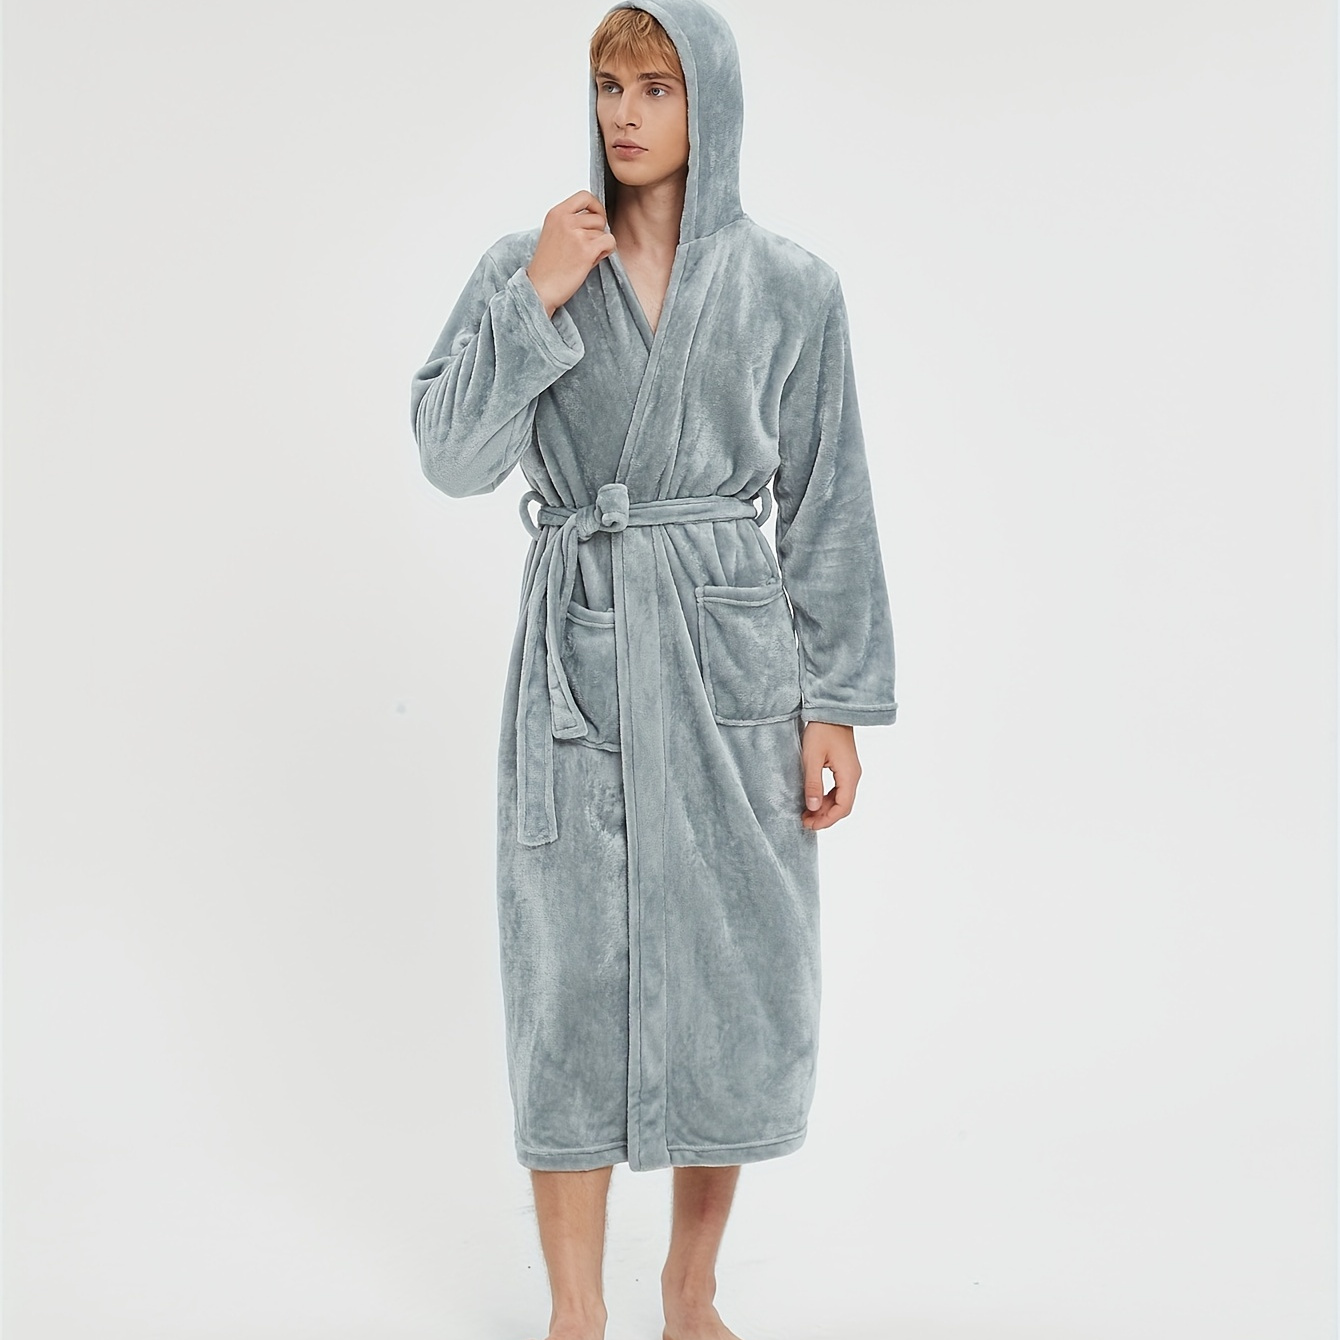 

Men's Comfy Solid Fleece Robe Home Hooded Pajamas Wear With Pocket & Hair Dry Hat, One-piece Lace Up Kimono Night-robe Warm Sets After Bath